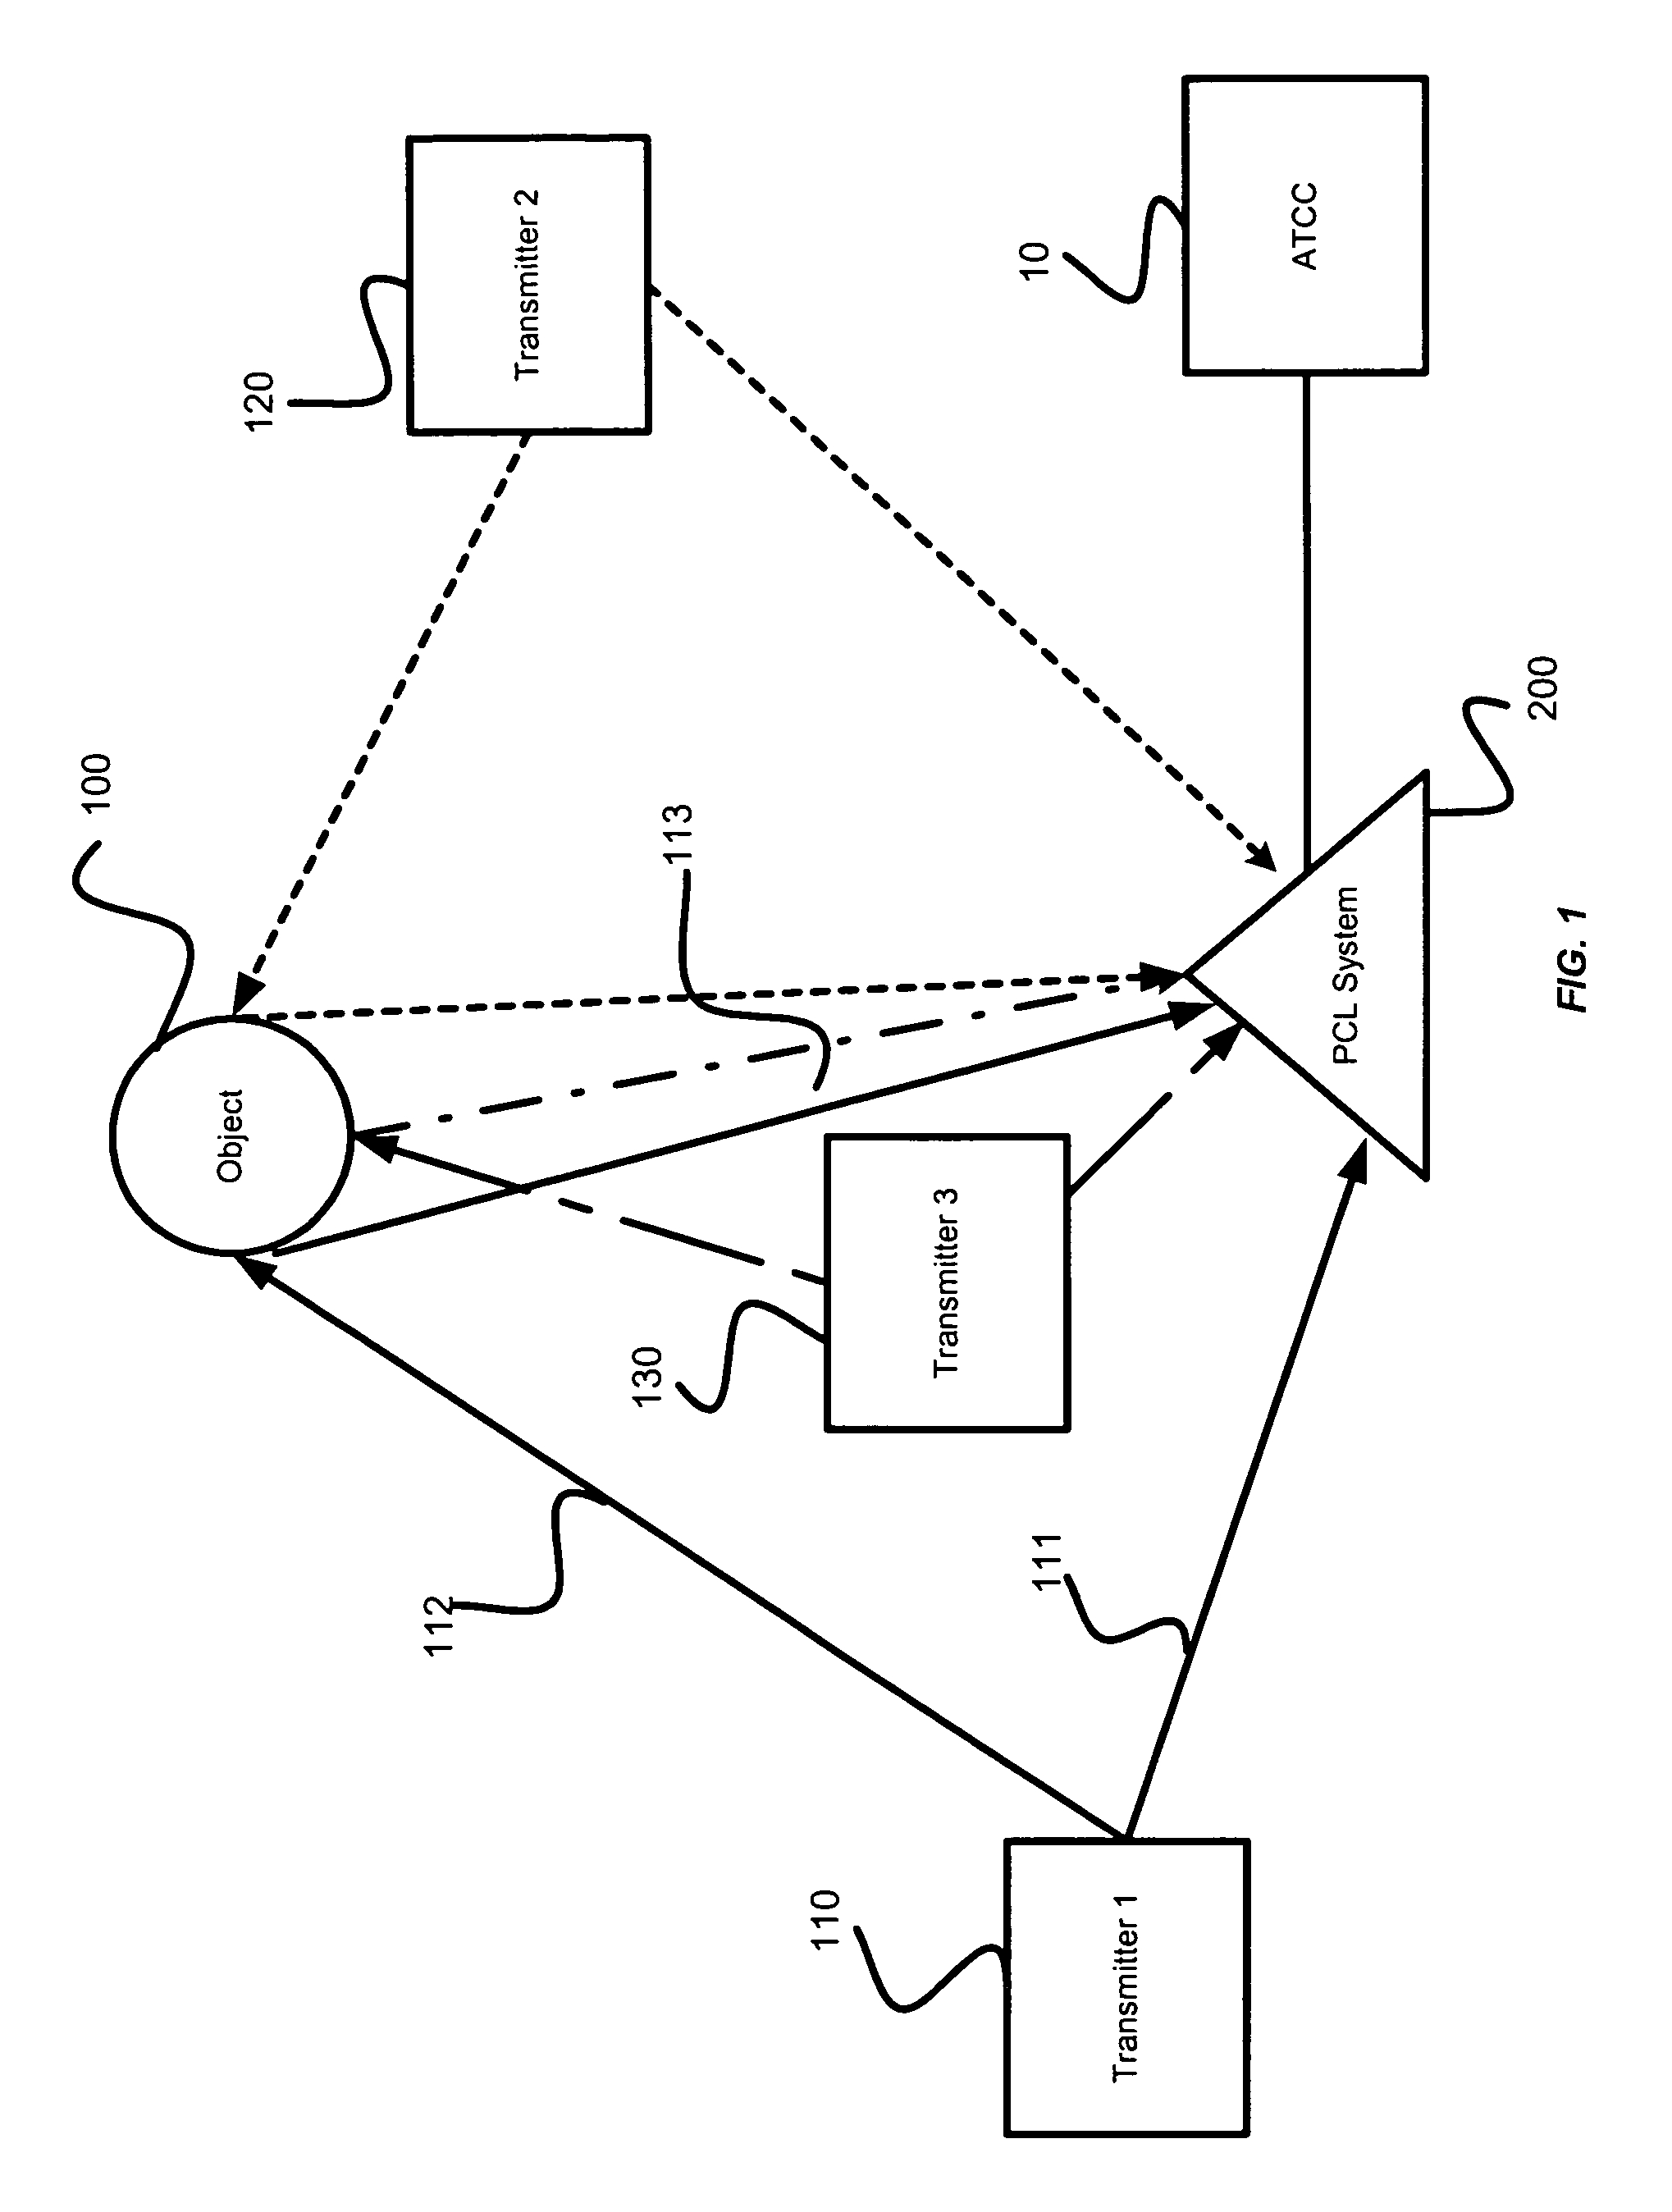 Civil aviation passive coherent location system and method